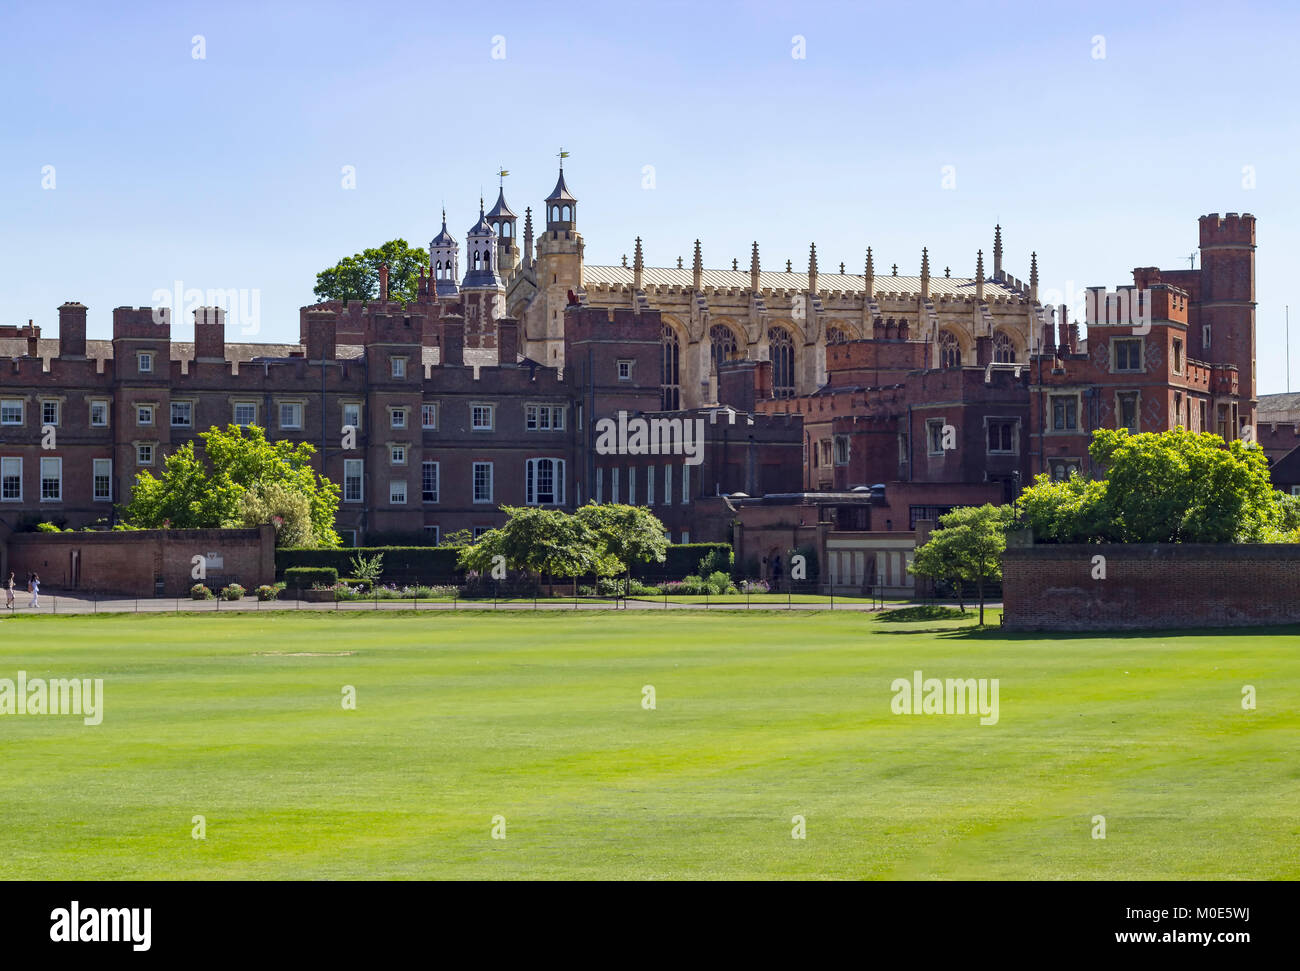 Windsor, England - 26 May 2017: Architecture of the Eton College Eton College Fields And Building And Chapel in the city of Windsor, England. Stock Photo